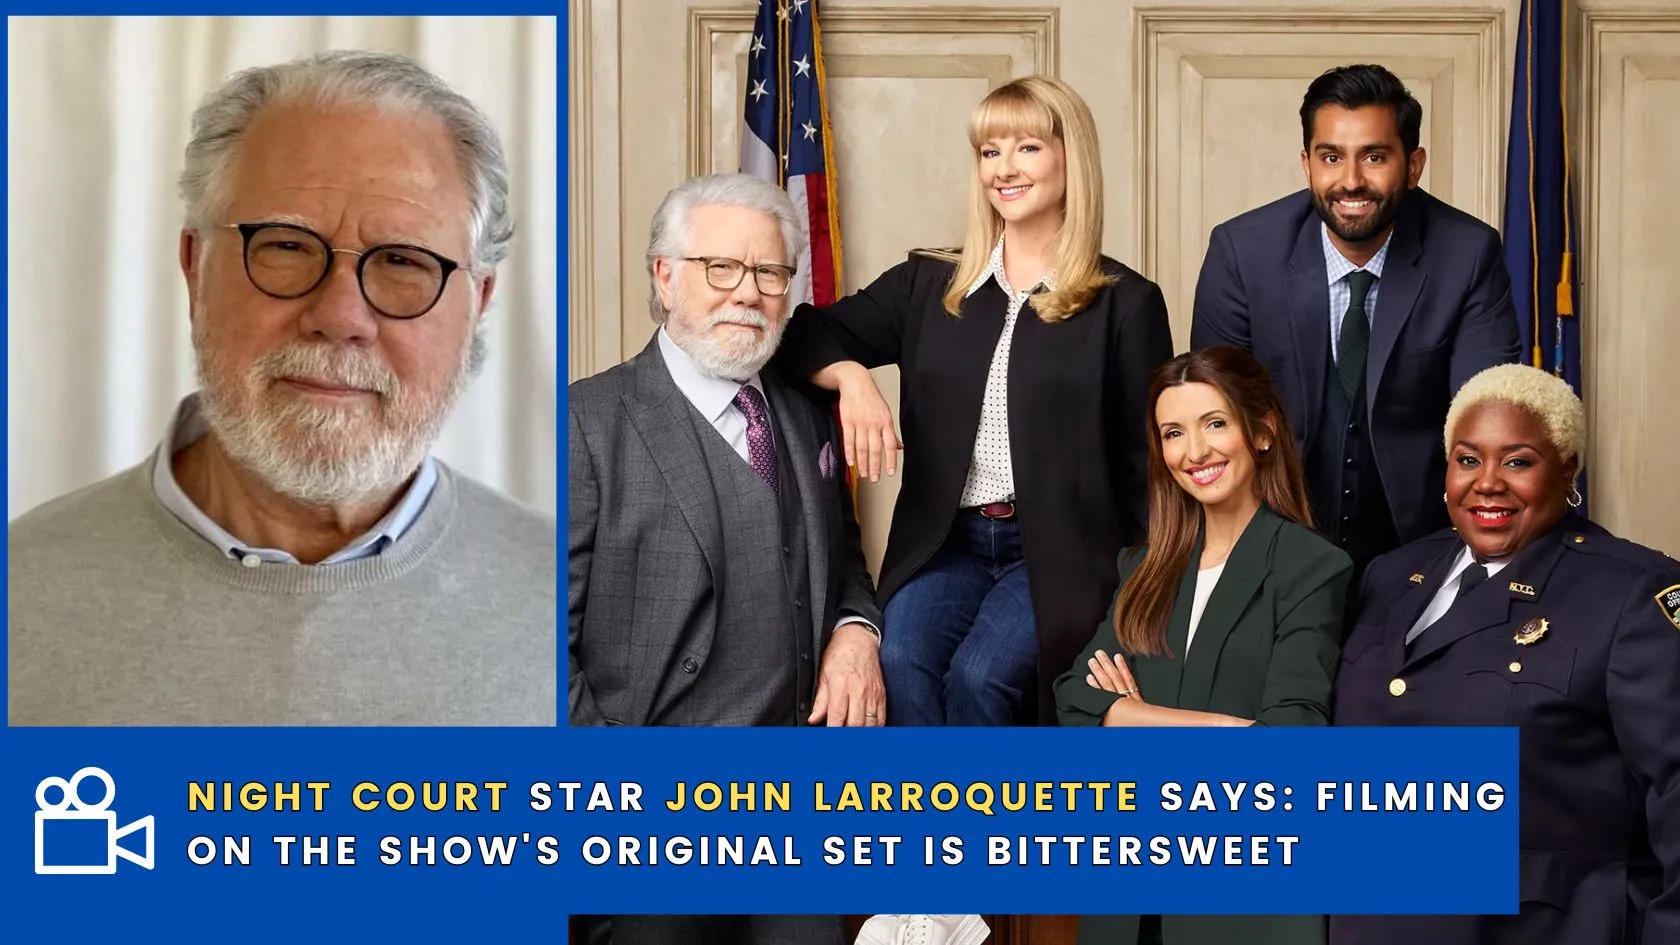 Night Court Star John Larroquette Says_ Filming On The Show's Original Set Is Bittersweet